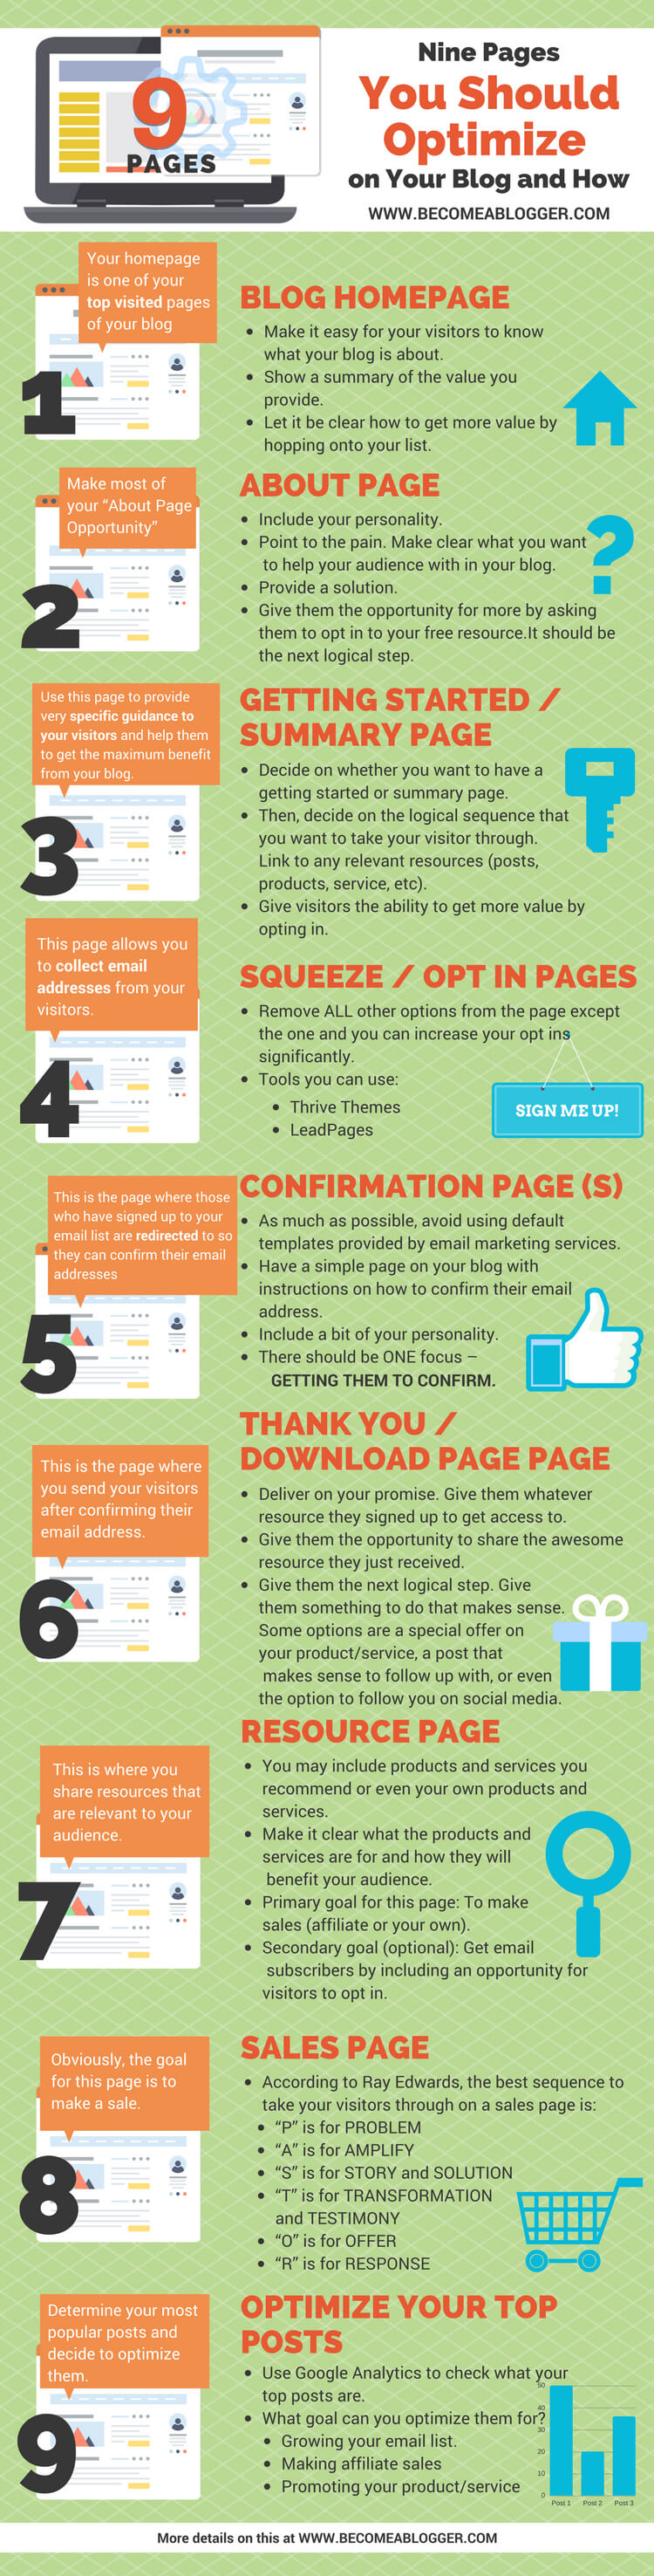 9 Pages You Should Optimize [Infographic]